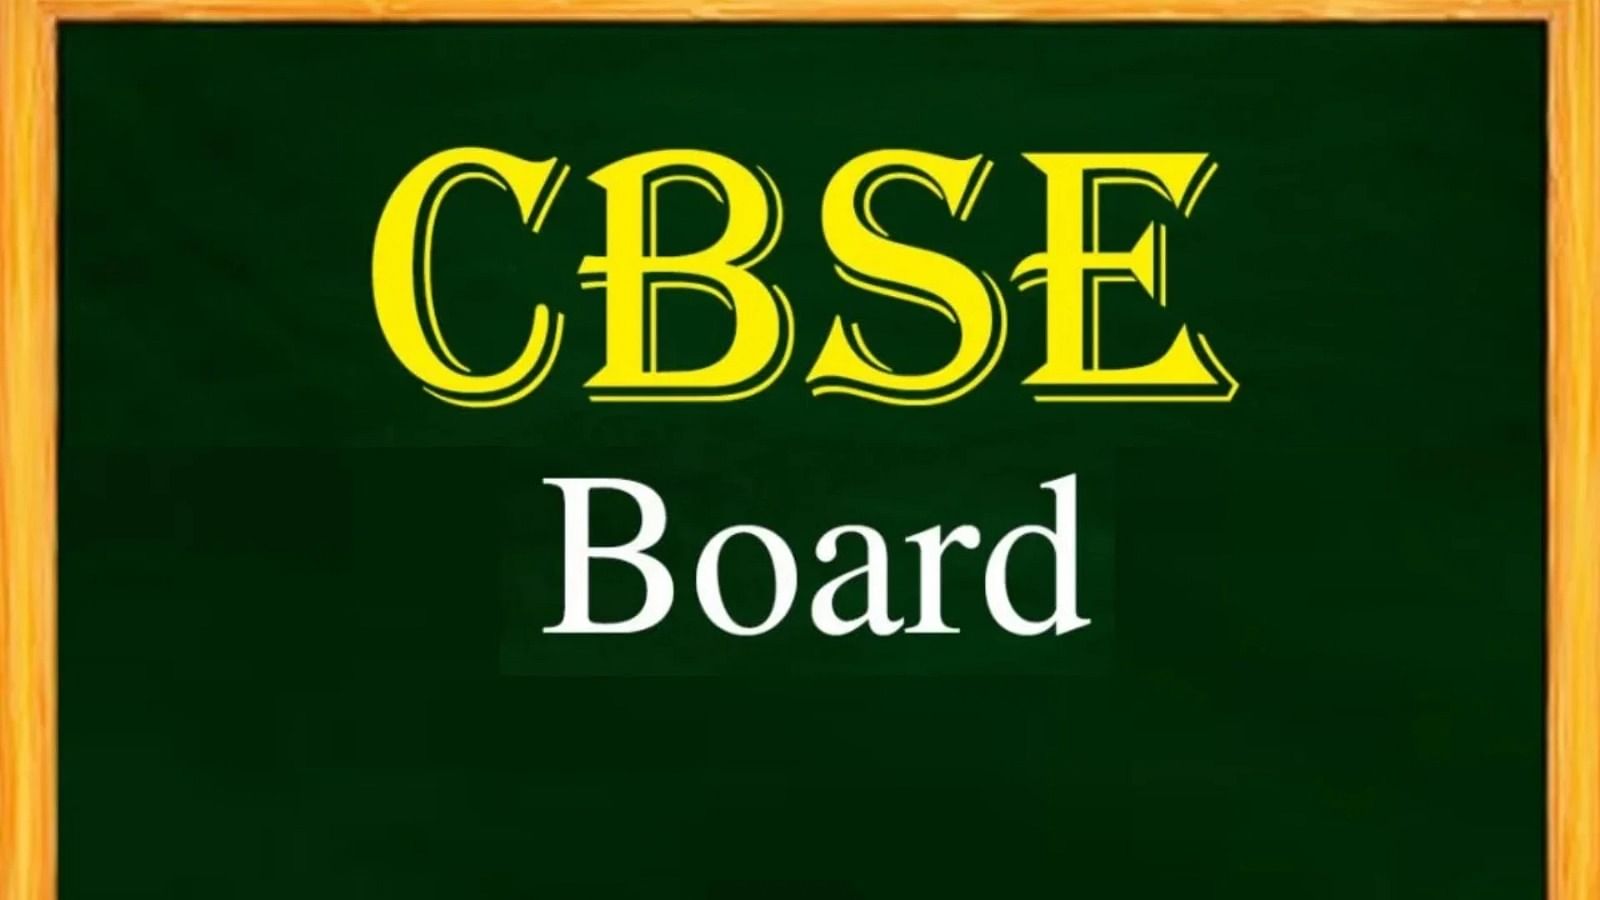 CBSE To Conduct Trials Of Open-Book Exams For Classes 9-12; No Plans To Adopt Format In Boards